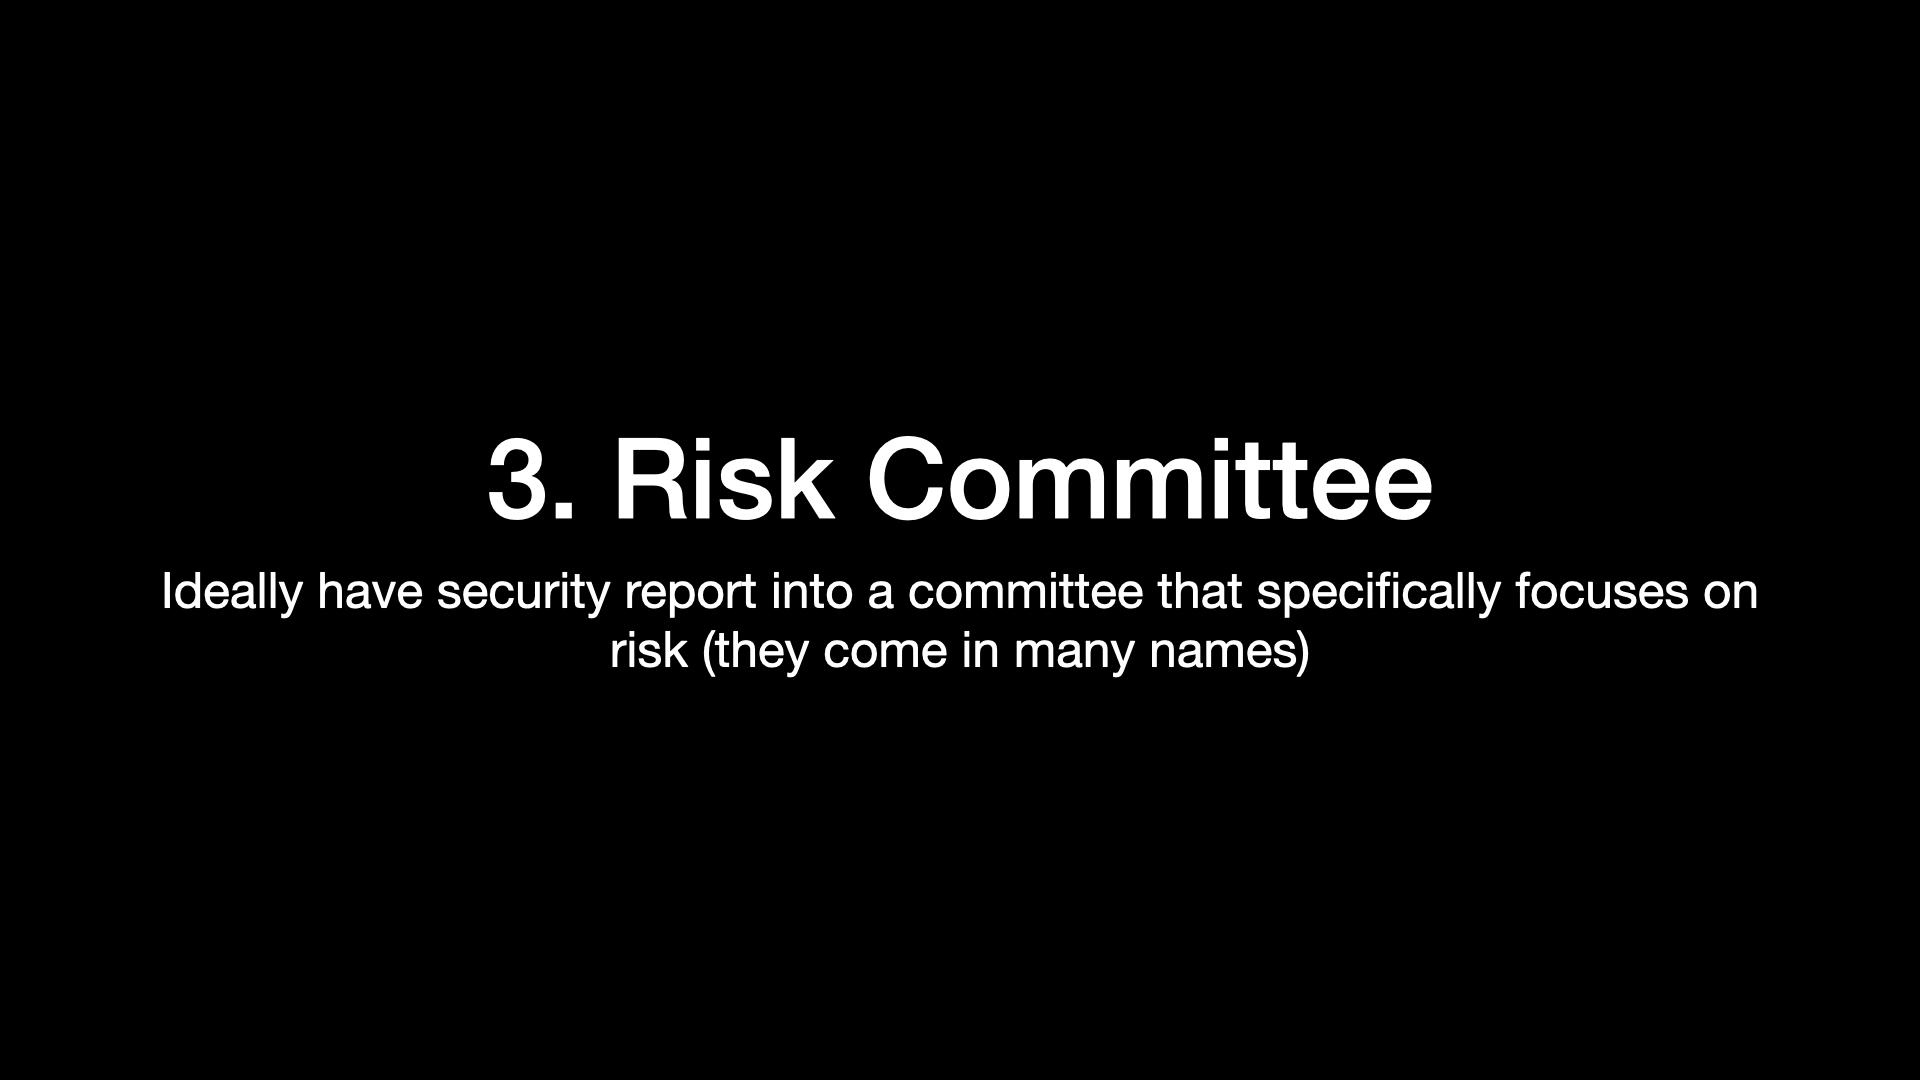 3. Risk Committee Ideally have security report into a committee that specifically focuses on risk (they come in many names) 